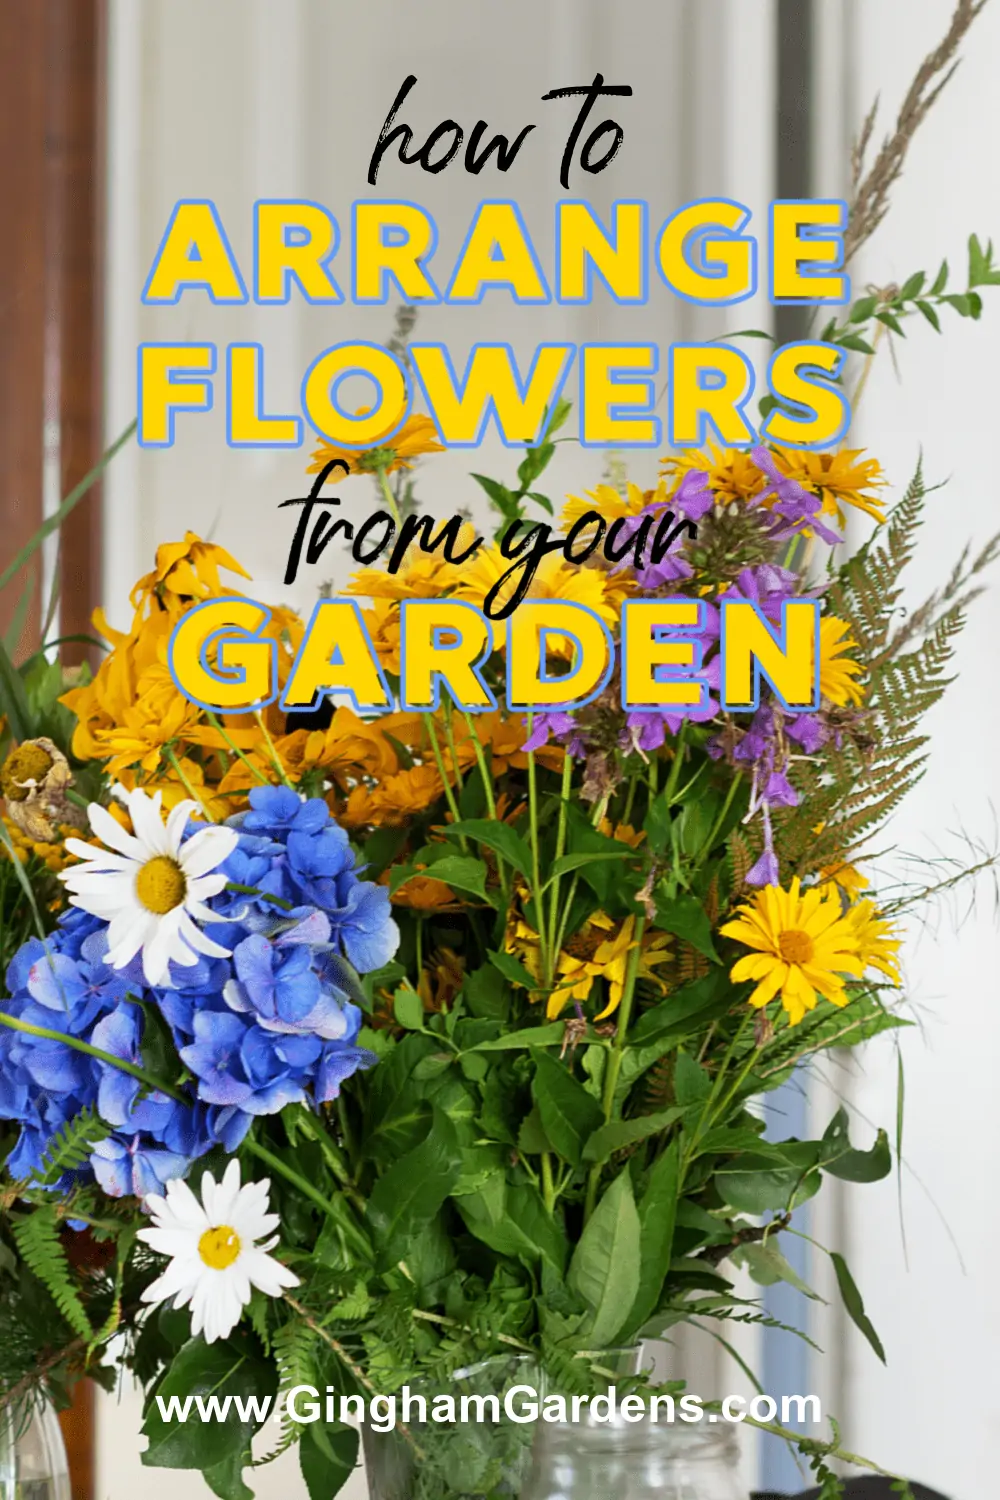 Image of a bouquet of flowers with text overlay - how to arrange flowers from your garden